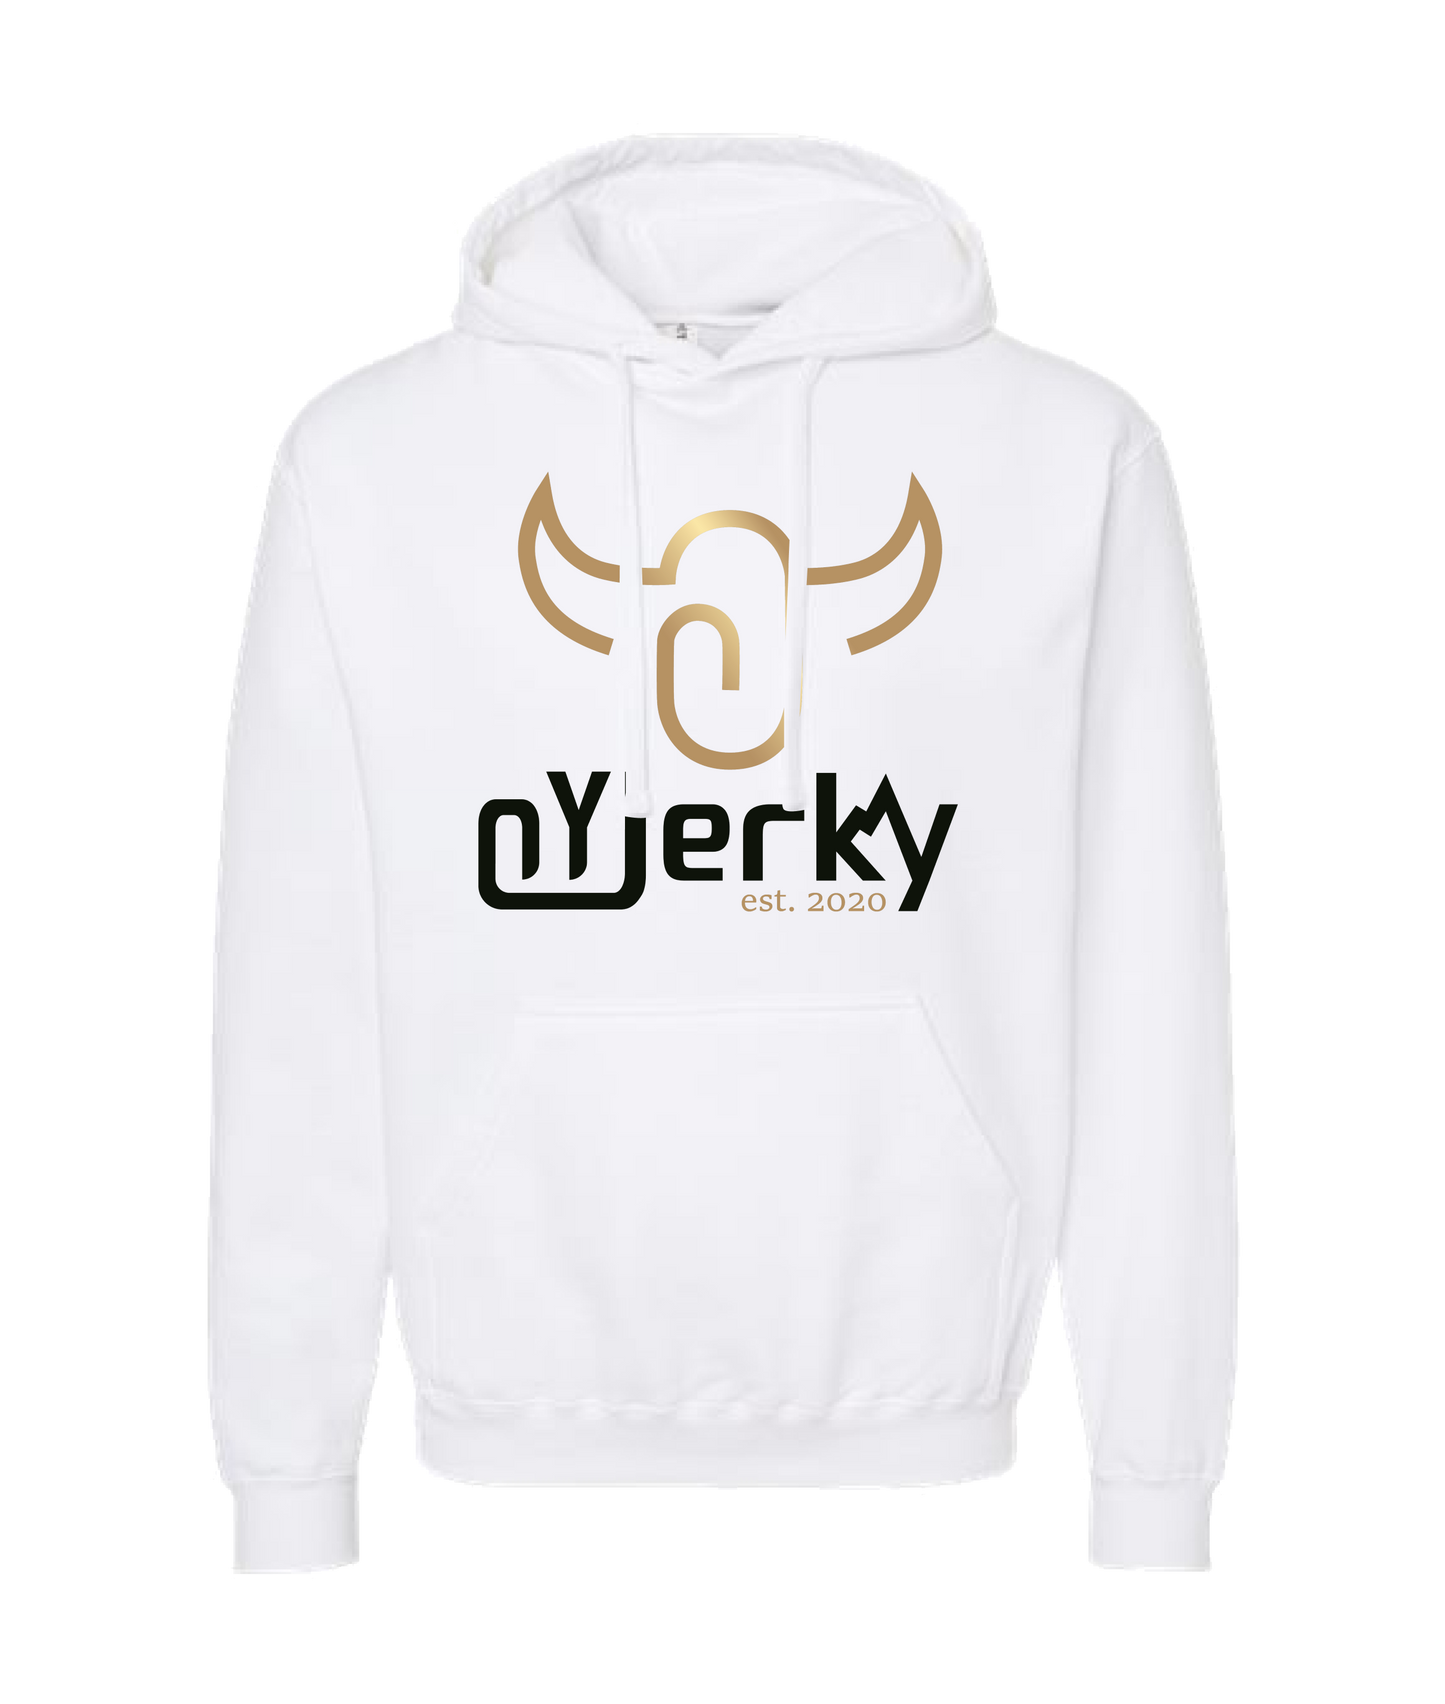 OY Jerky - Primary Logo Color - White Hoodie